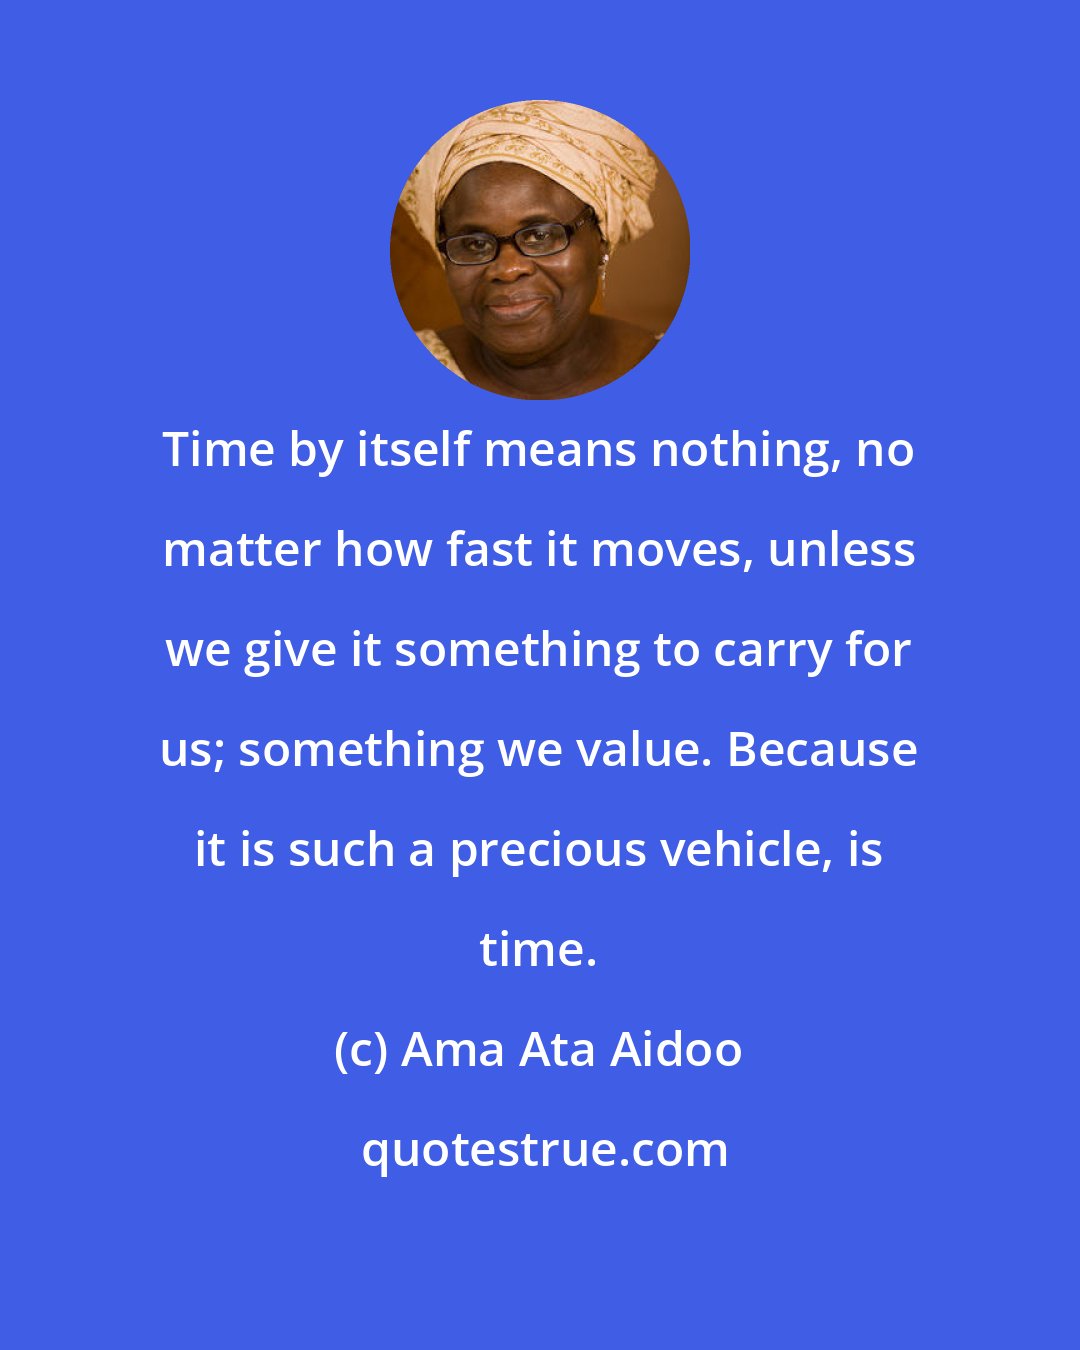 Ama Ata Aidoo: Time by itself means nothing, no matter how fast it moves, unless we give it something to carry for us; something we value. Because it is such a precious vehicle, is time.